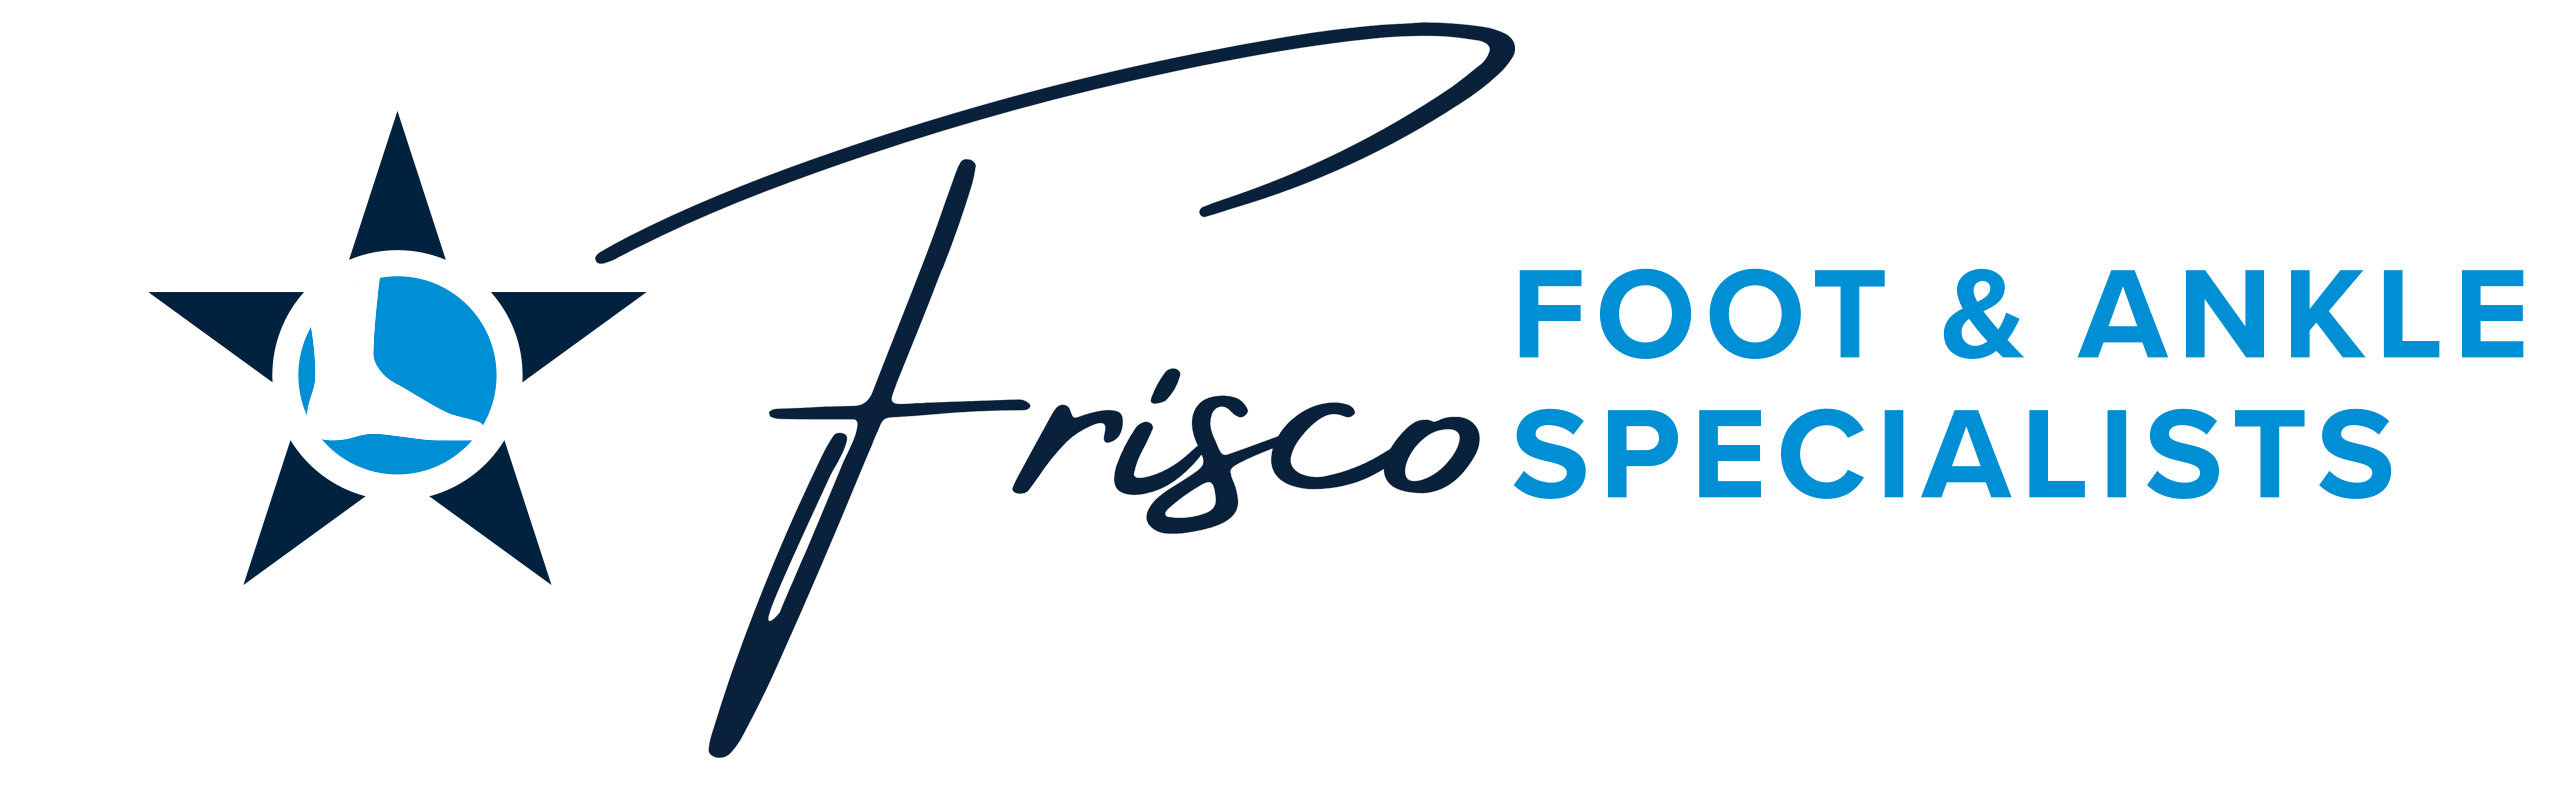 Frisco Foot & Ankle Specialists